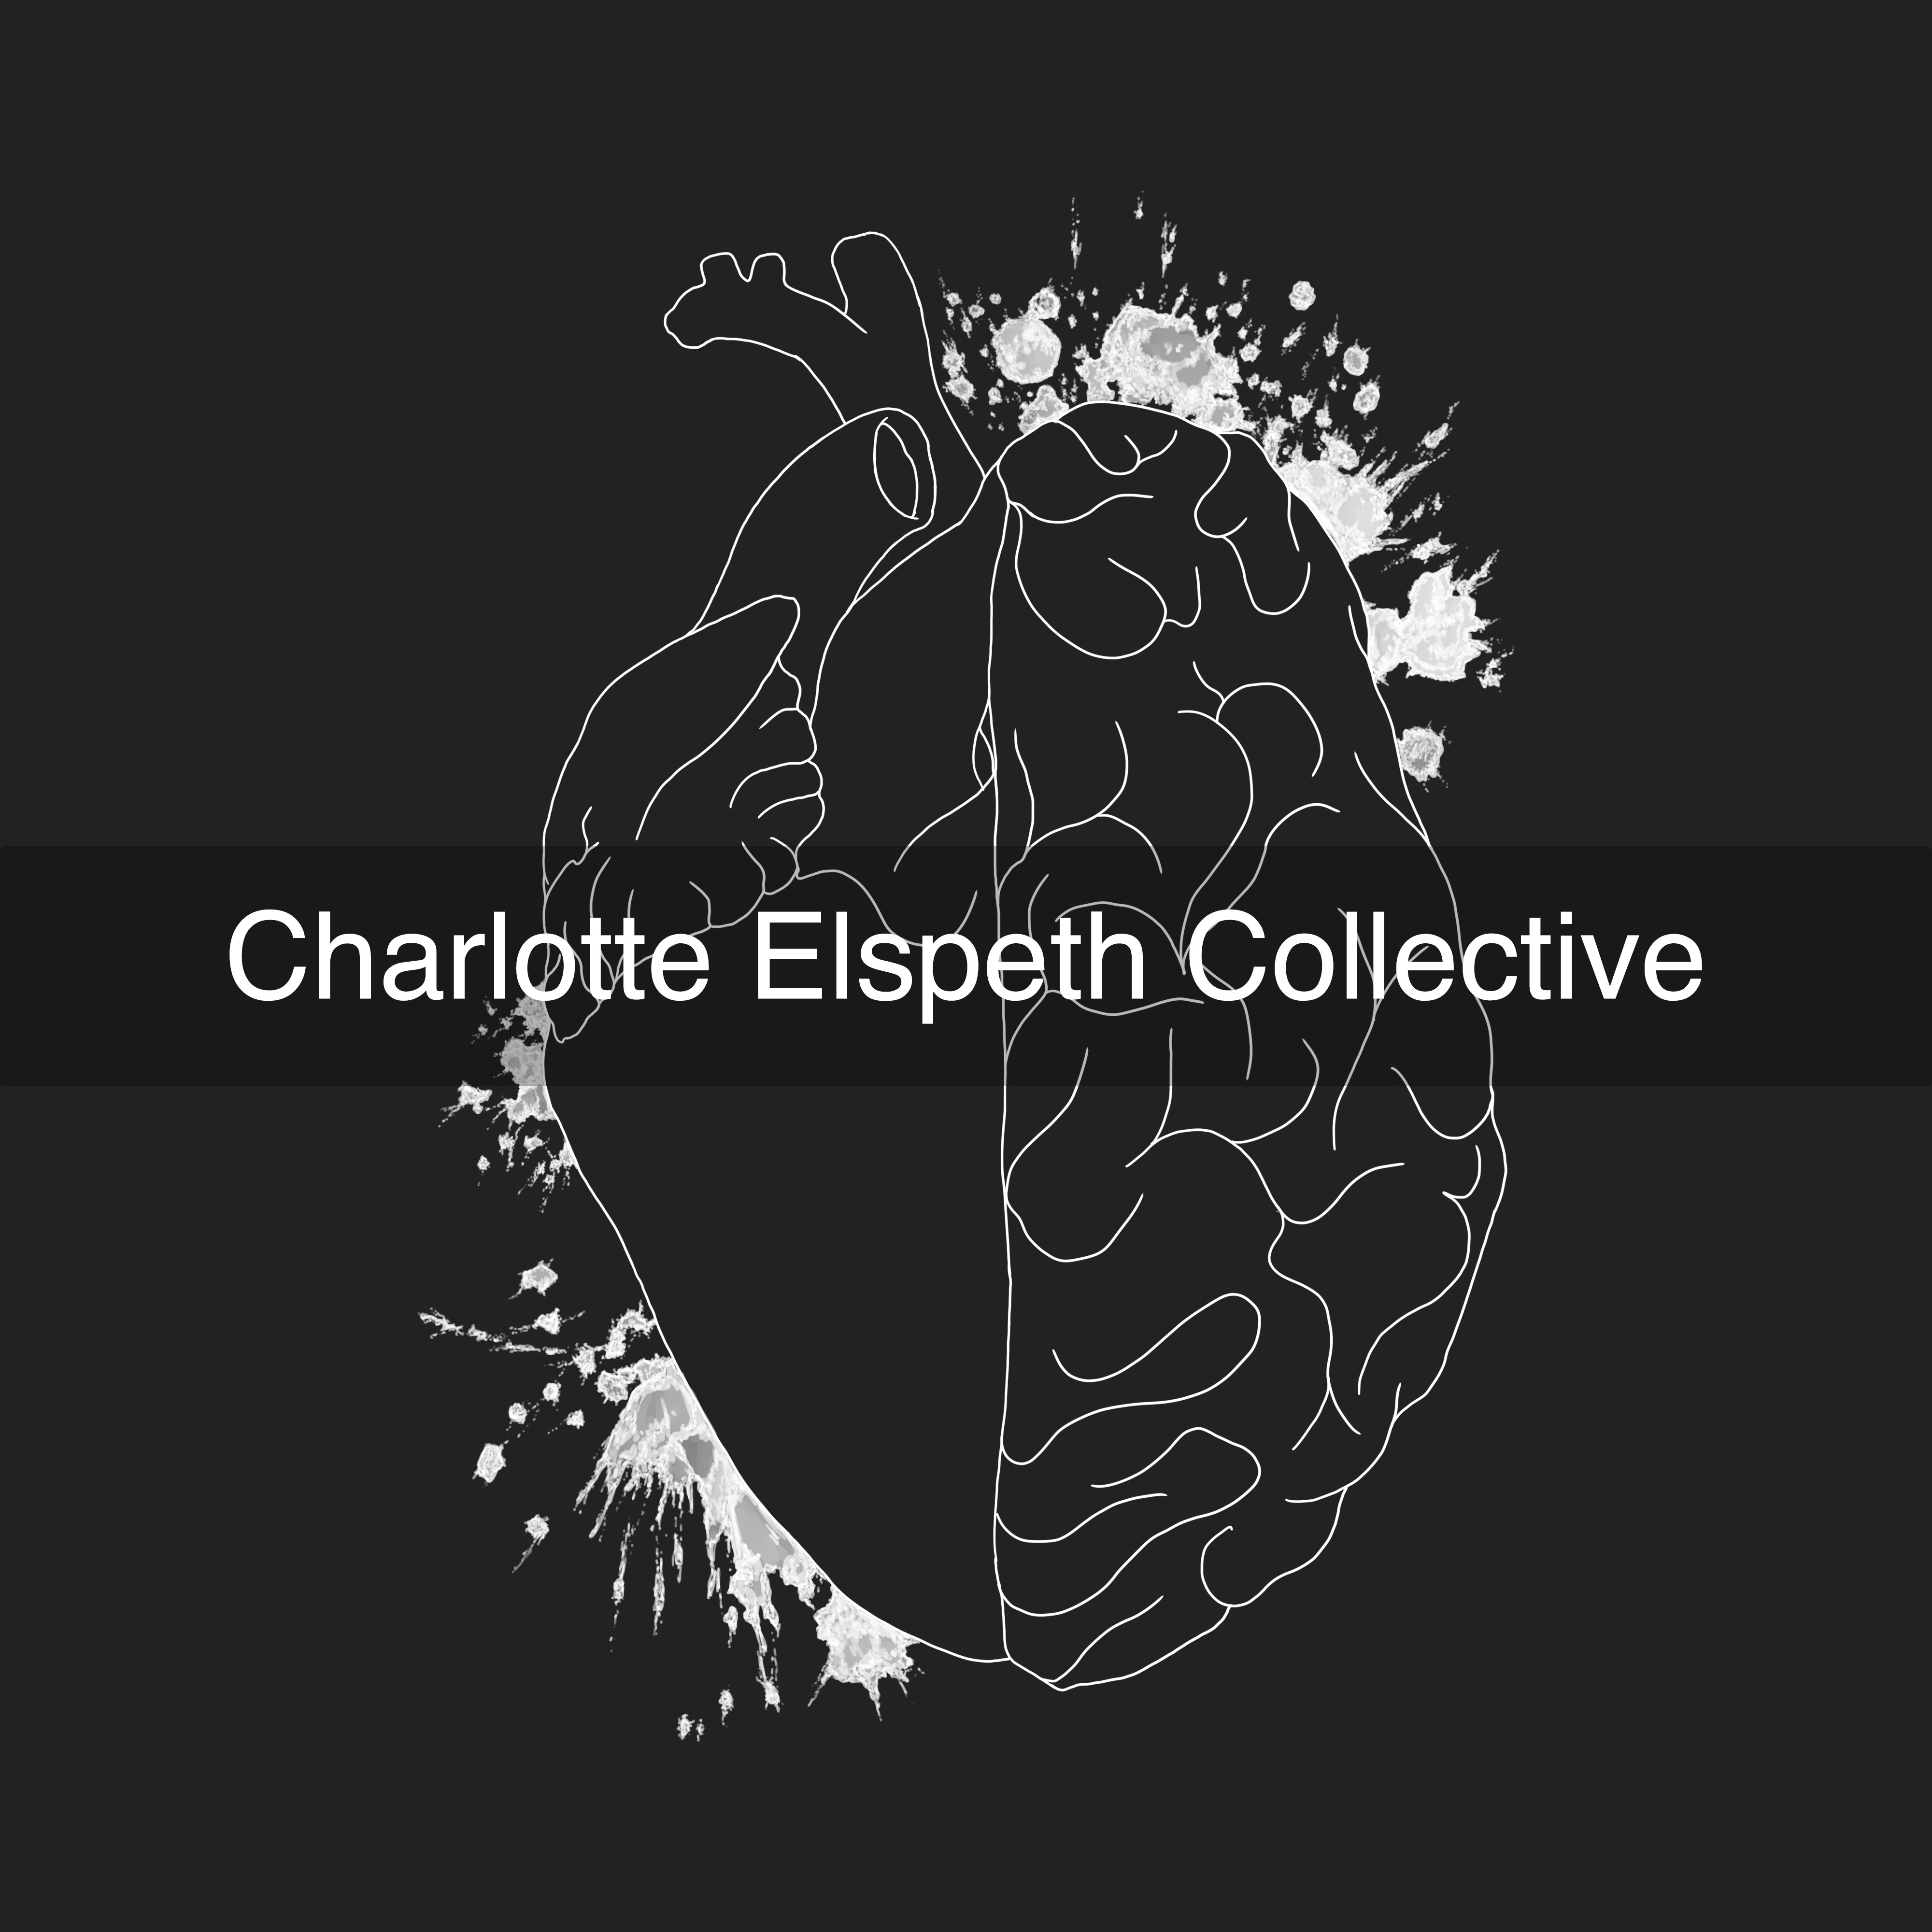 Charlotte Elspeth Collective